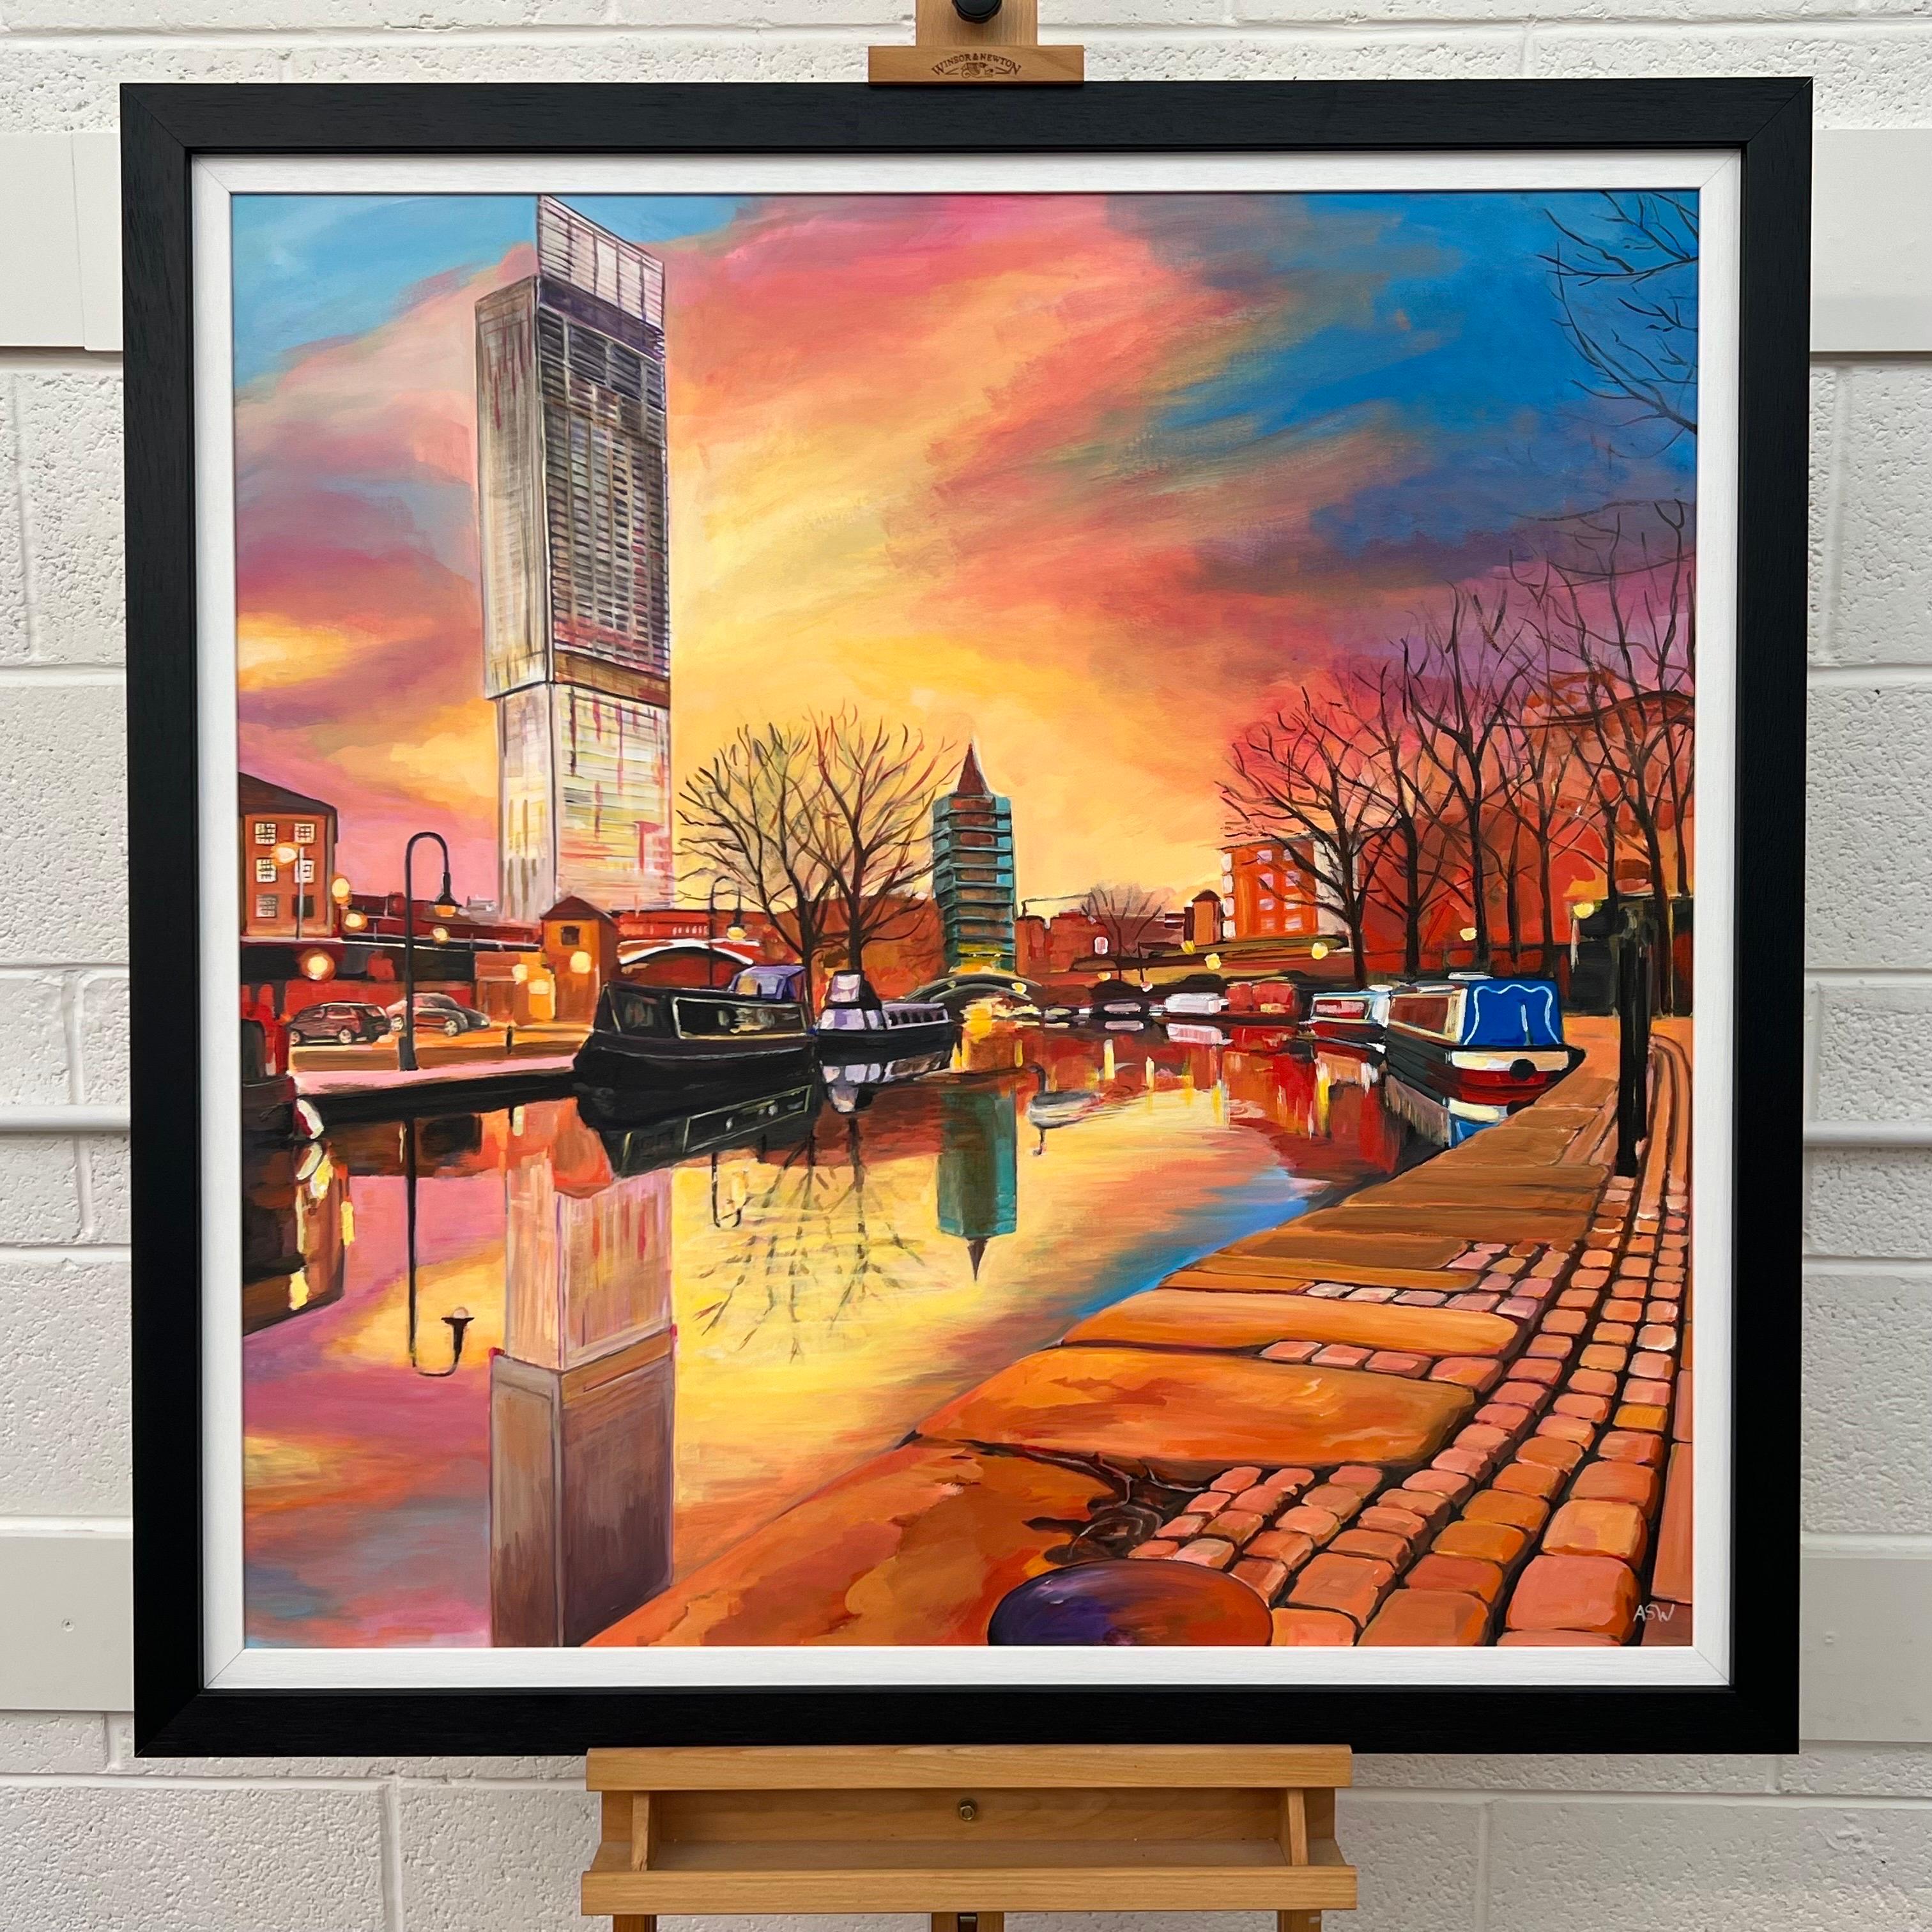 Bridgewater Canal Manchester Industrial City by Contemporary British Artist - Brown Landscape Painting by Angela Wakefield